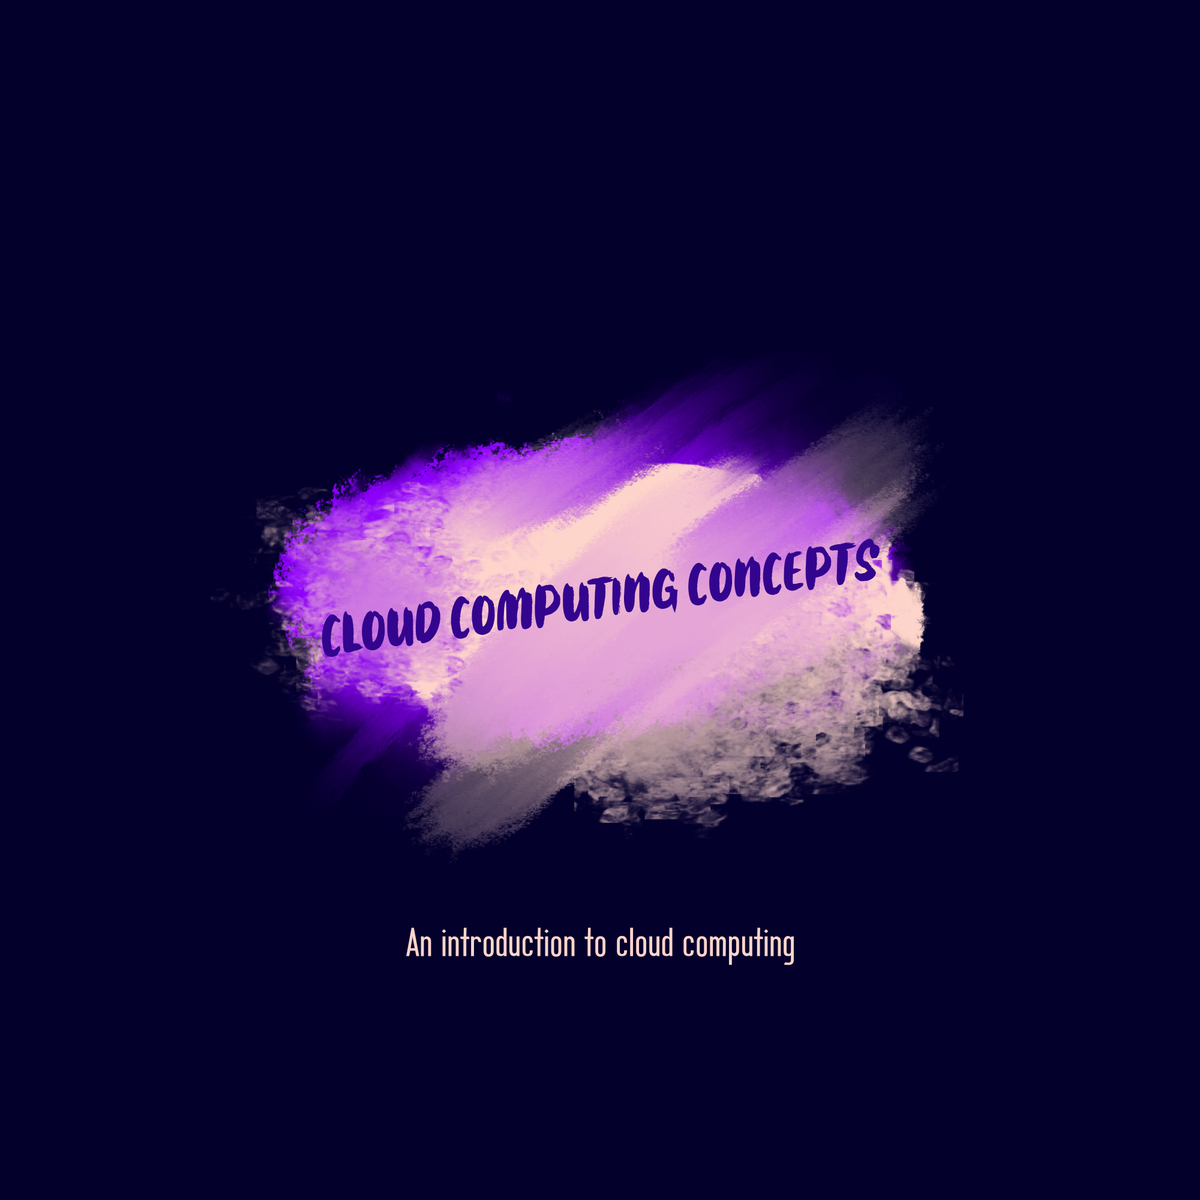 Some basic information on cloud concepts The first question you might ask yourself is “what is cloud computing?”. In layman’s terms, cloud computing is simply like using someone else’s computer. Instead of having your server, you rent the server from somebody else like AWS.